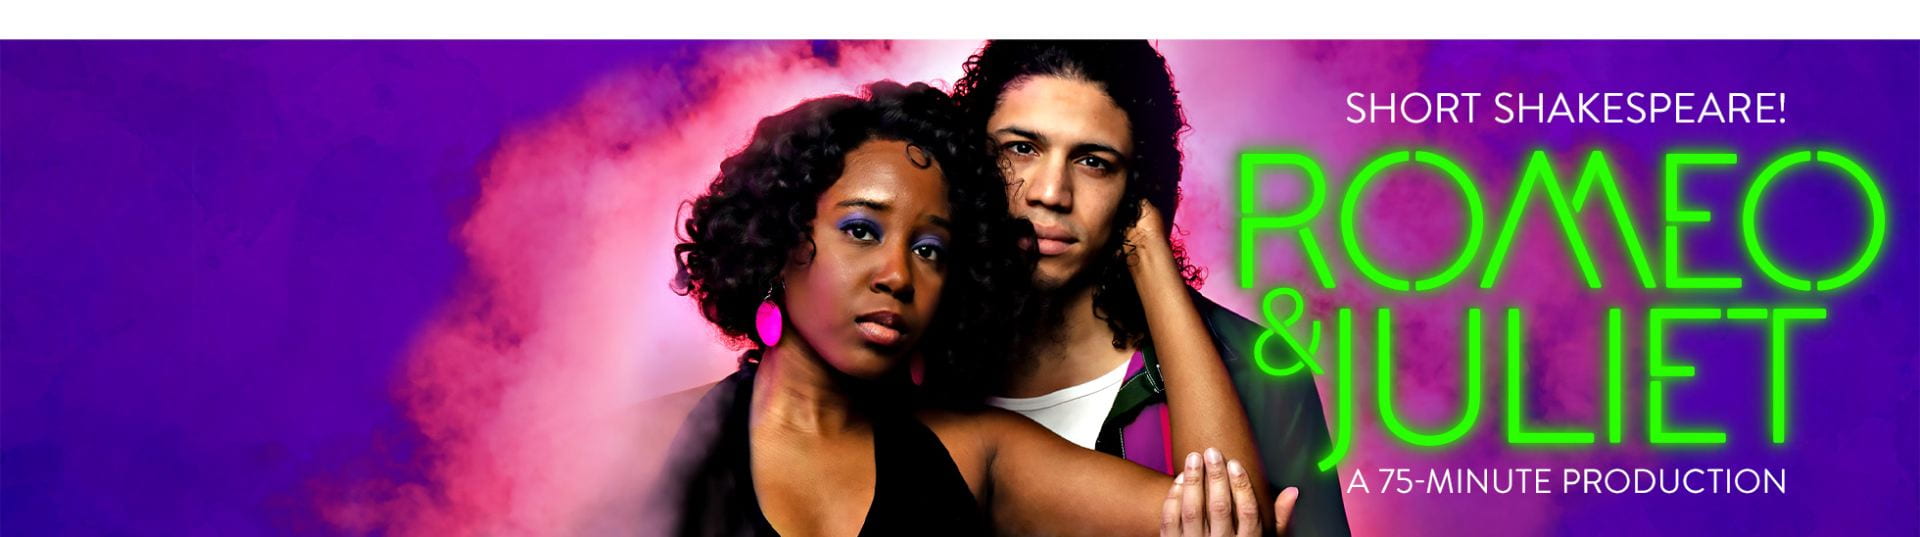 Romeo and Juliet at Chicago Shakespeare Theater